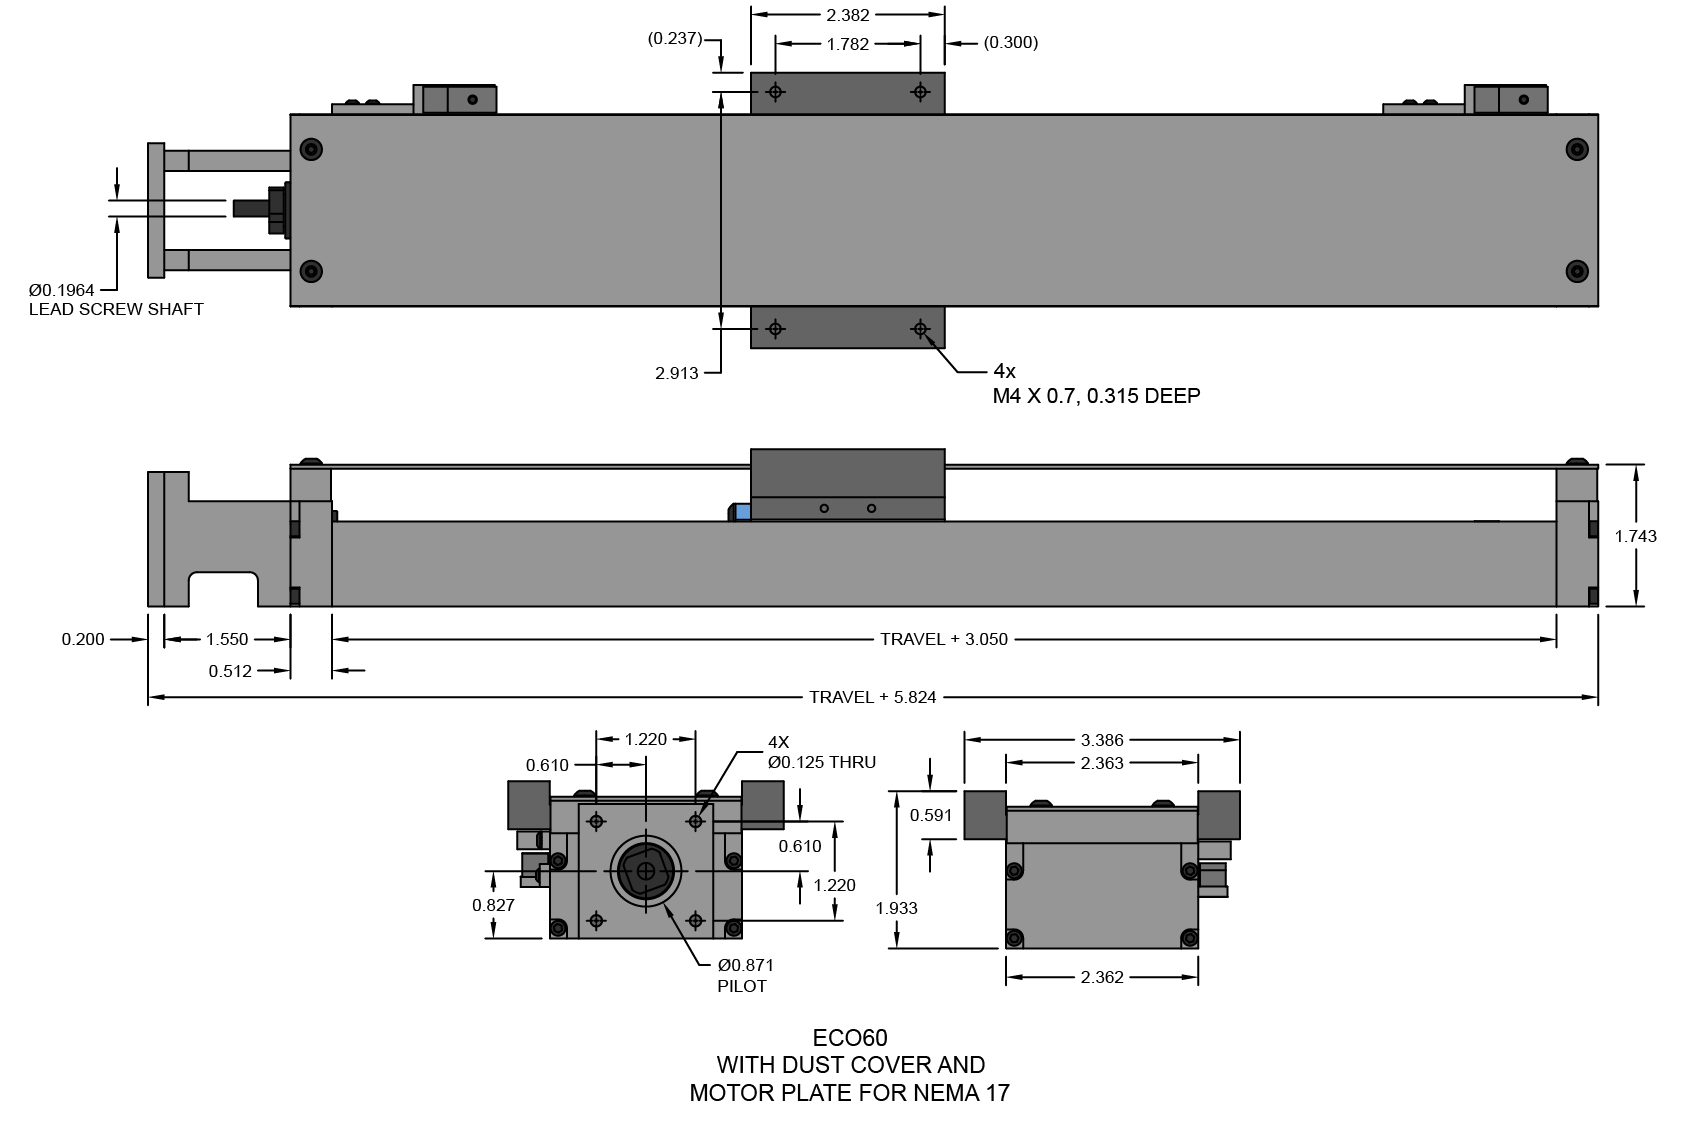  Dimensions of ECO60 actuator with NEMA 17 motor mount and dust covers. 